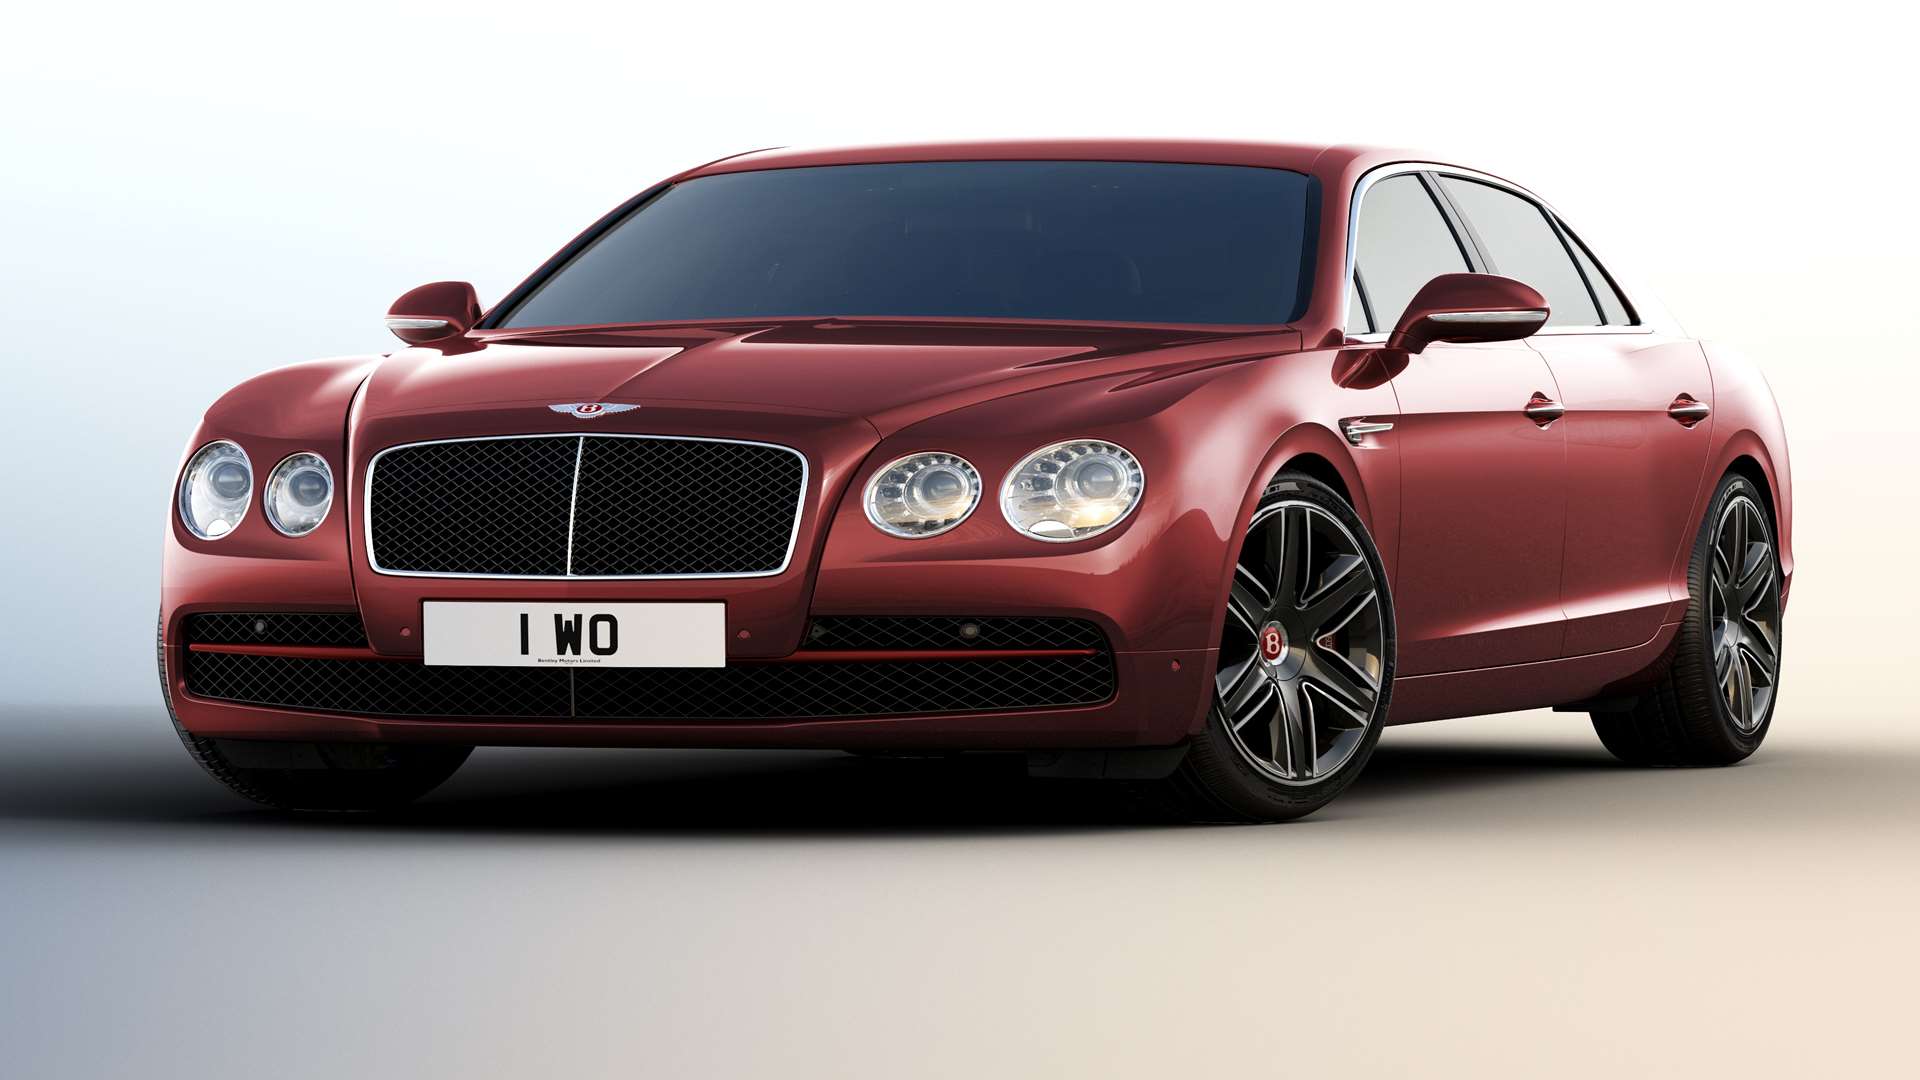 You can become the proud owner of a brand new Flying Spur for a bargain £146,000